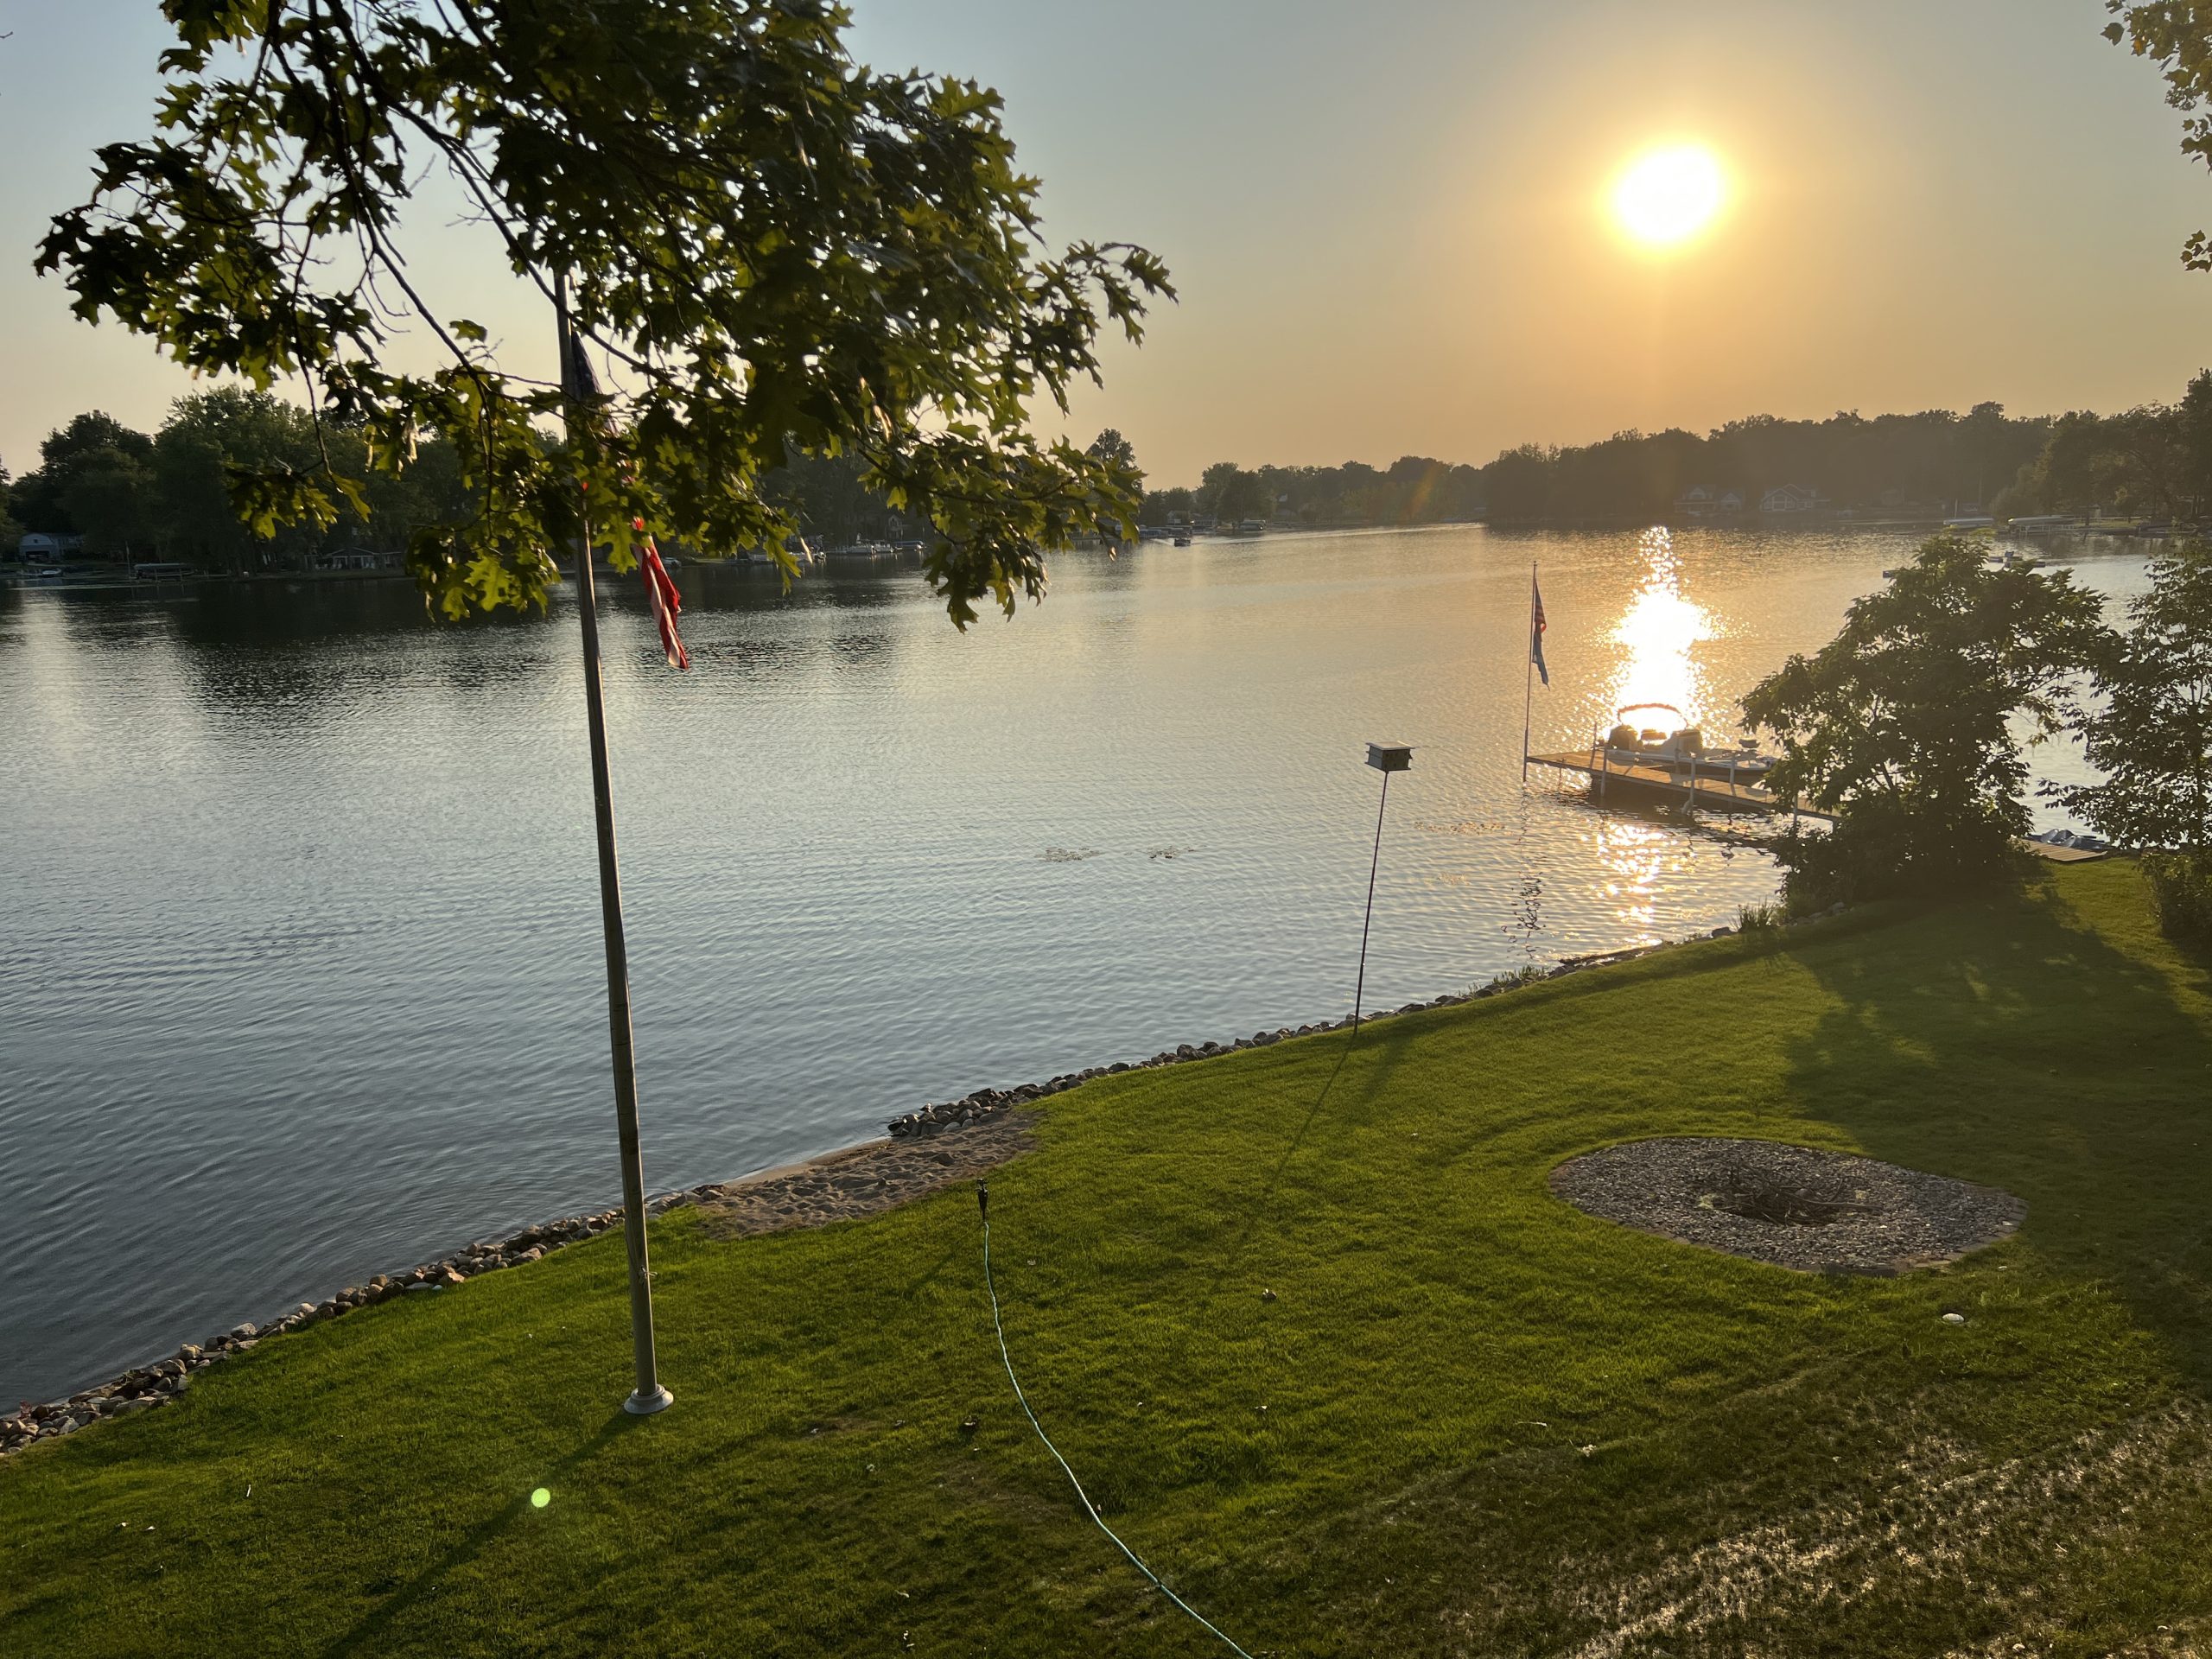 View from our deck overlooking Lake Sechrist, with the Sun setting in the background.